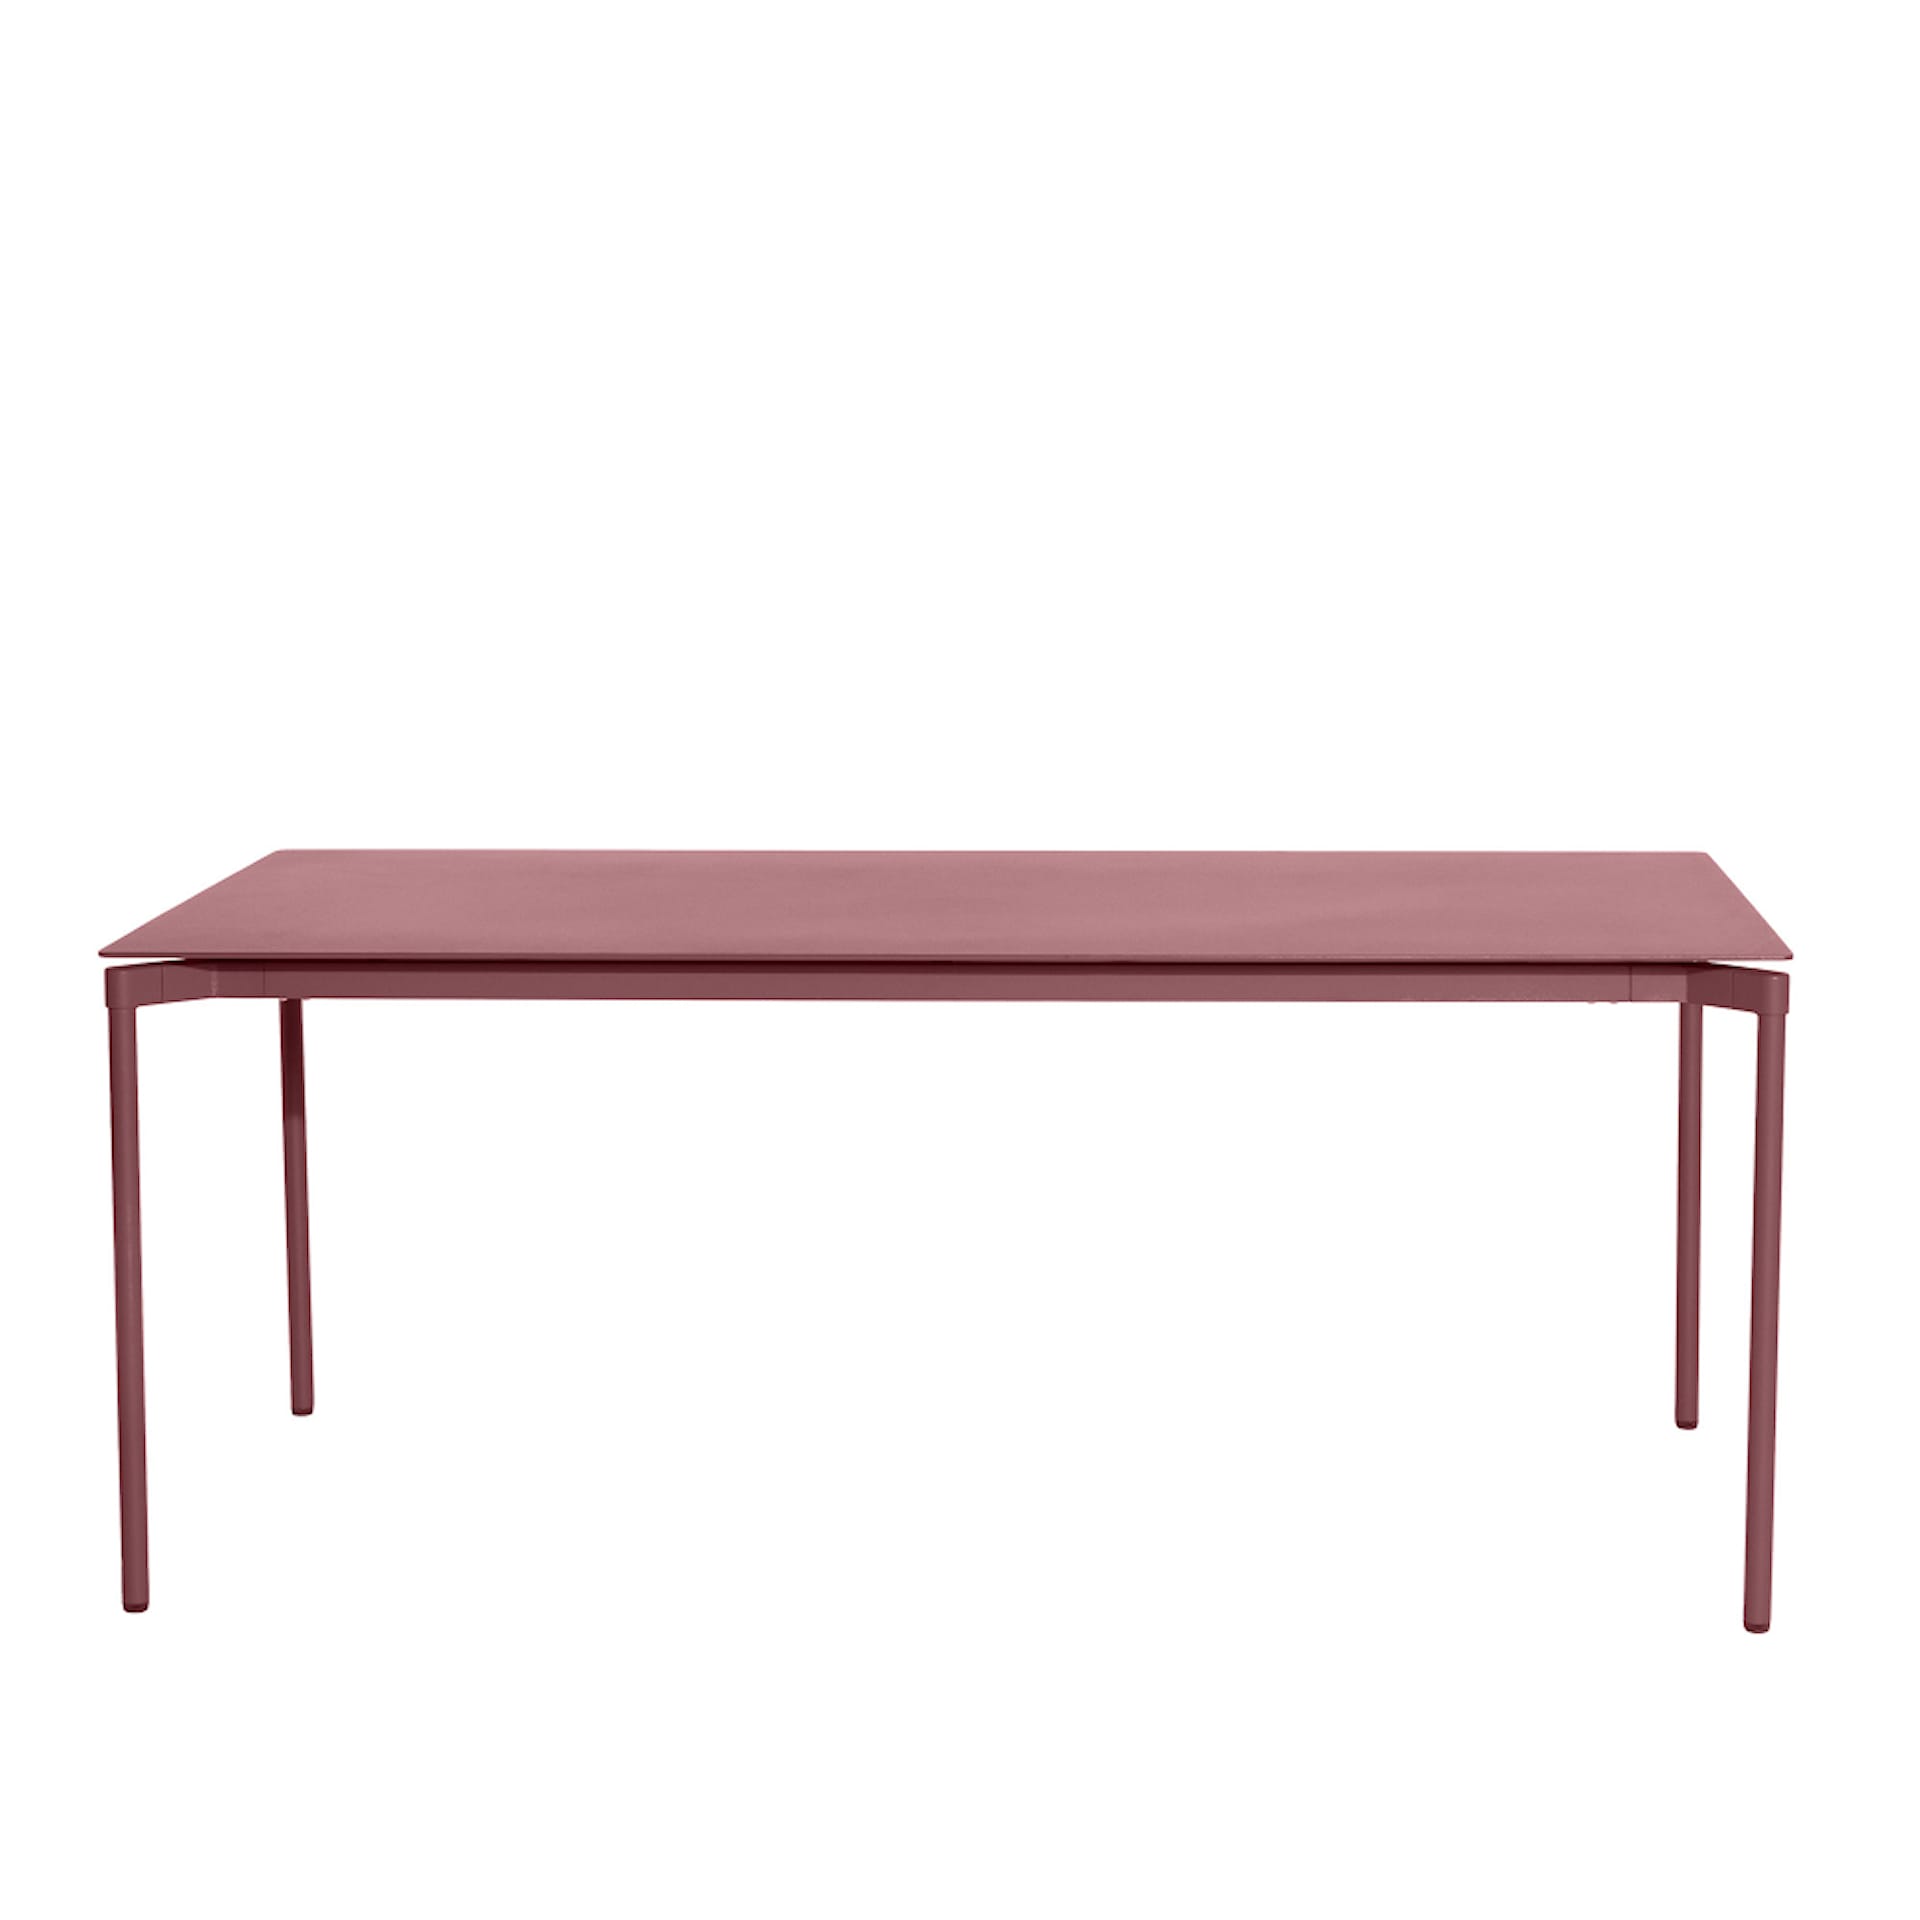 Fromme A Rectangular Table - Petite Friture - NO GA